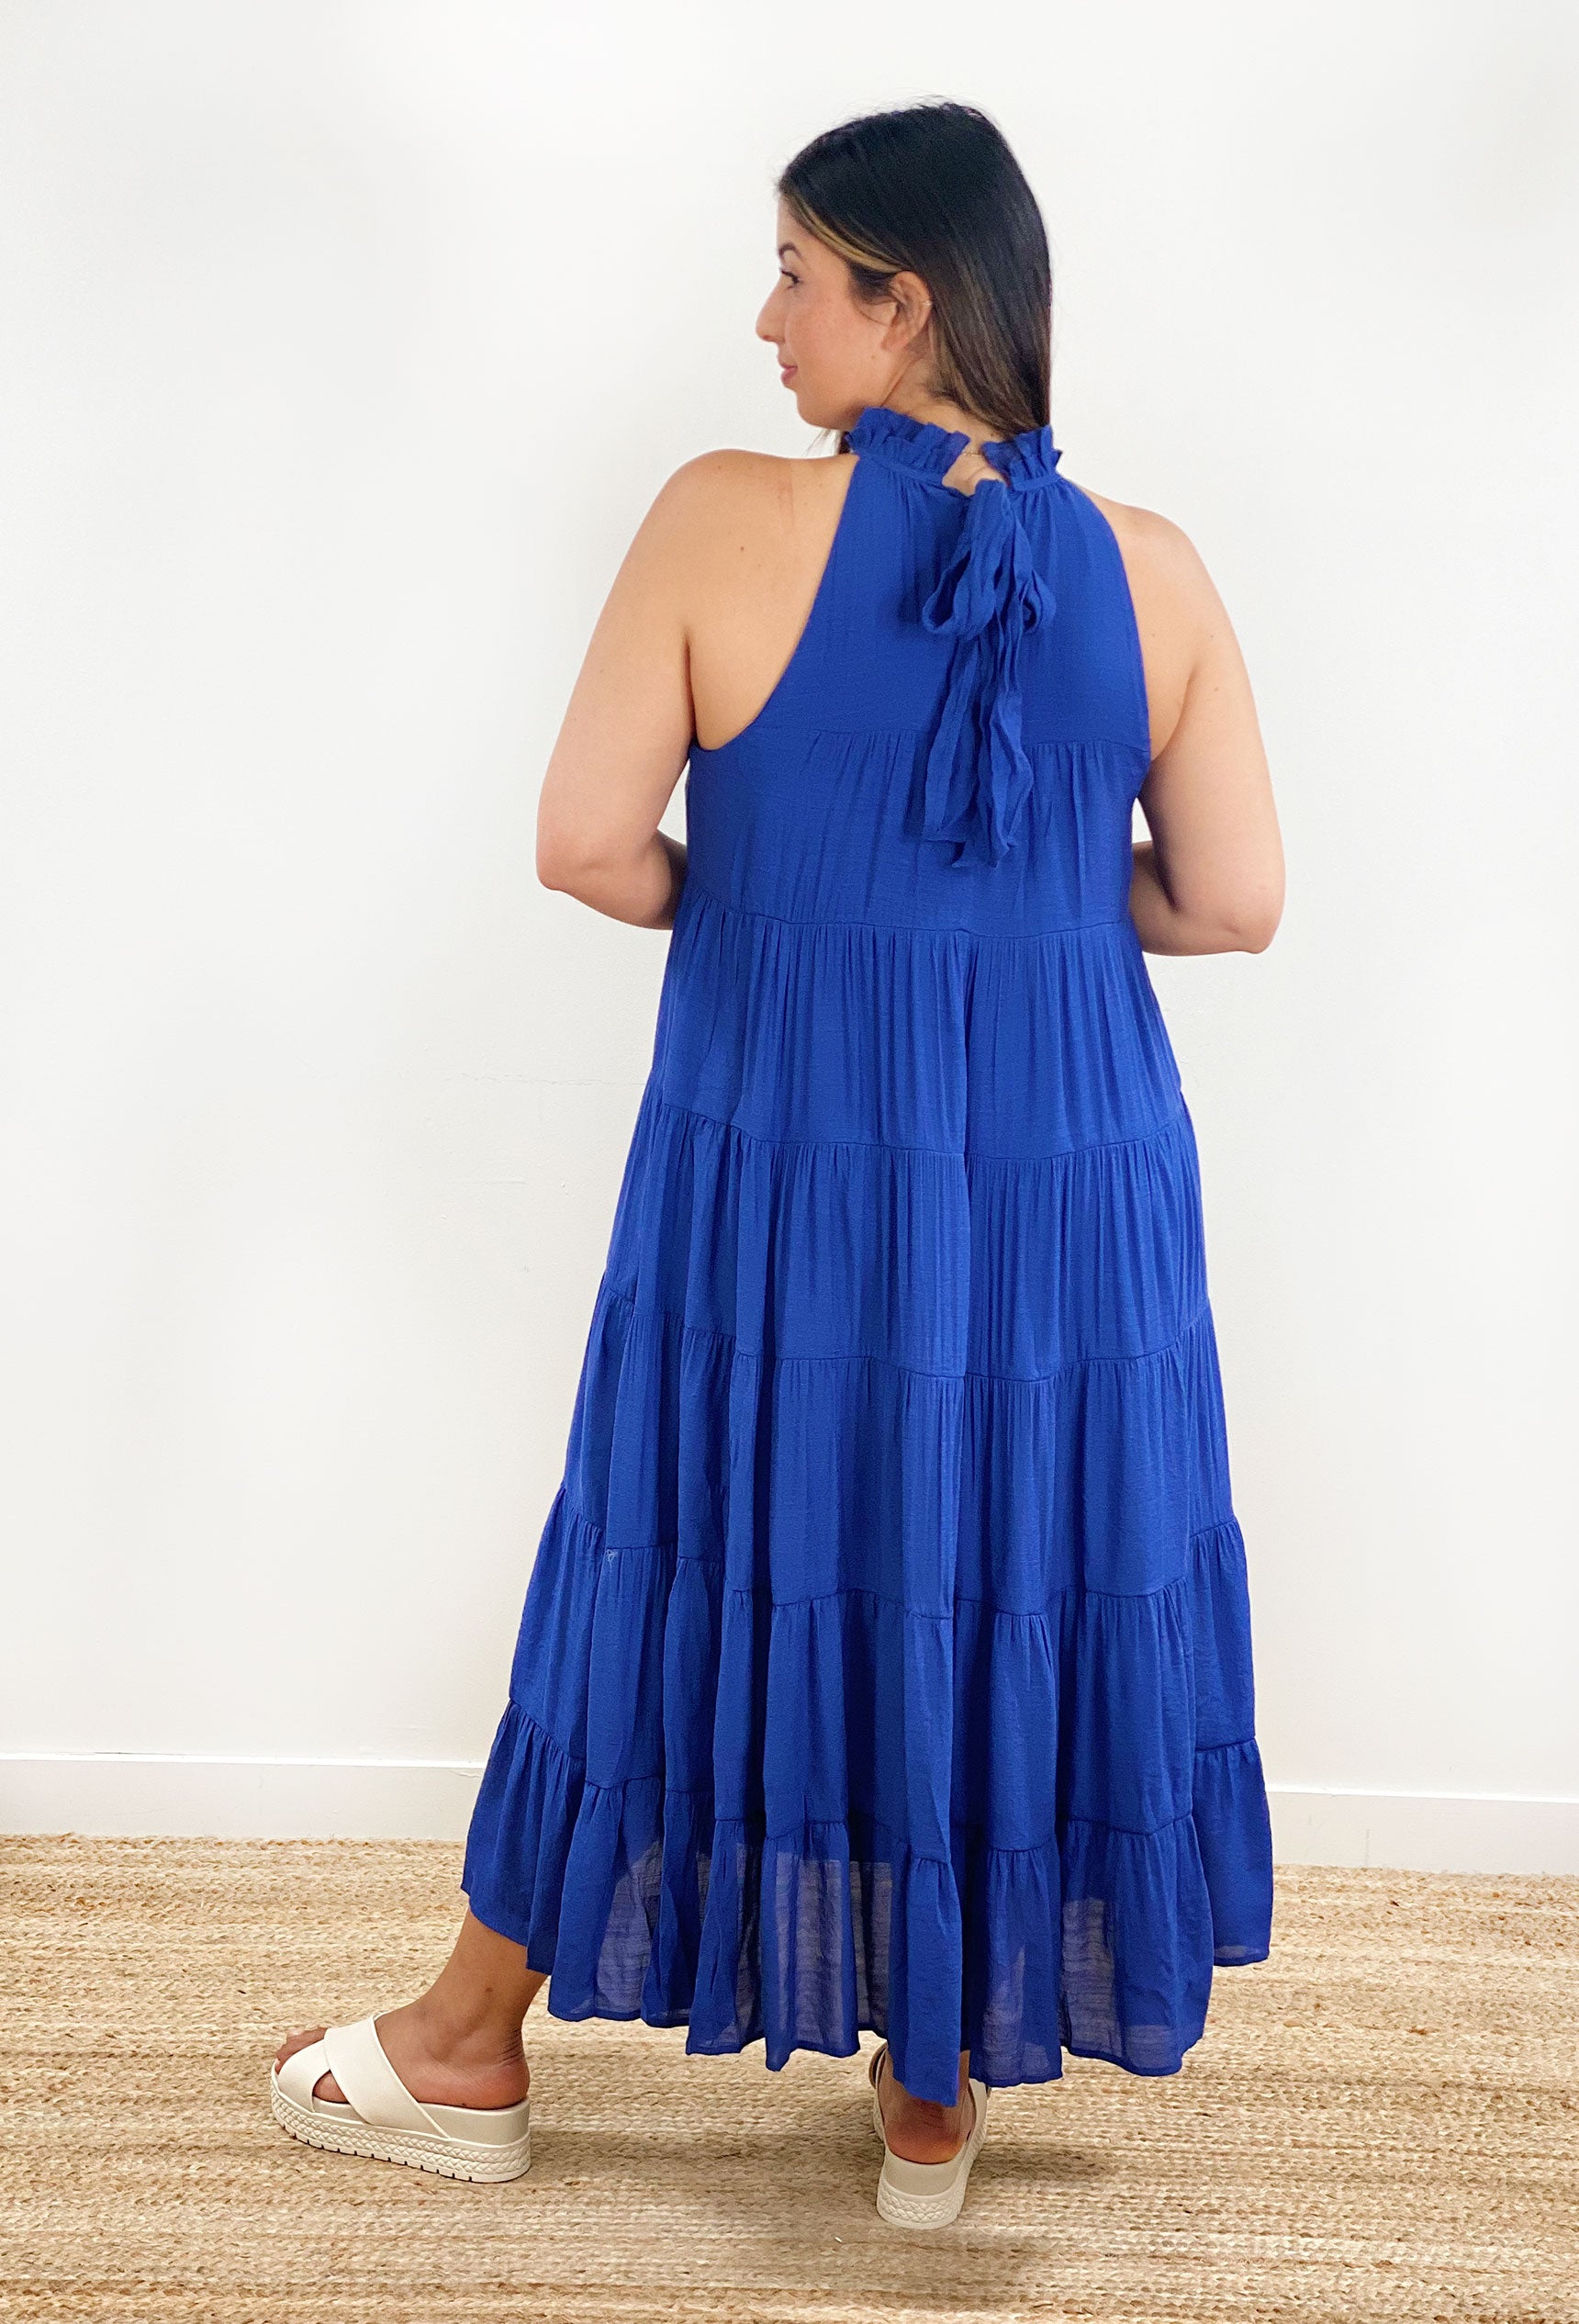 Lisbeth Navy Tiered Maxi Dress, Navy maxi dress, tiered layers with ruffles at neckline, self tie detail in back